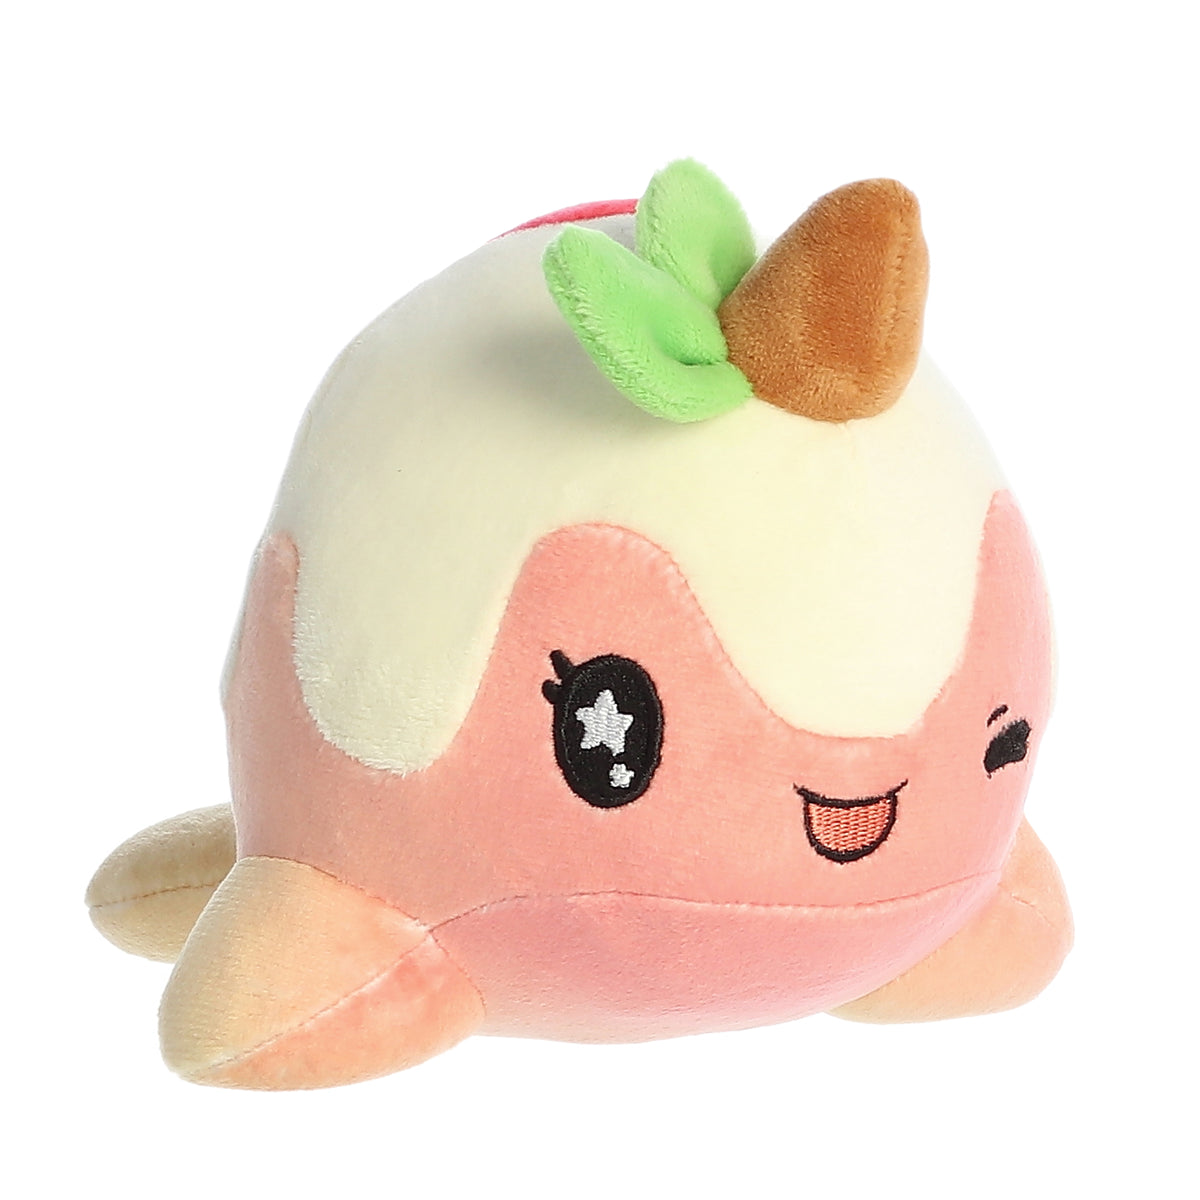 A pink and white Tasty Peach Nomwhal plush that is an expressive narwhal with big sparkling embroidered eyes